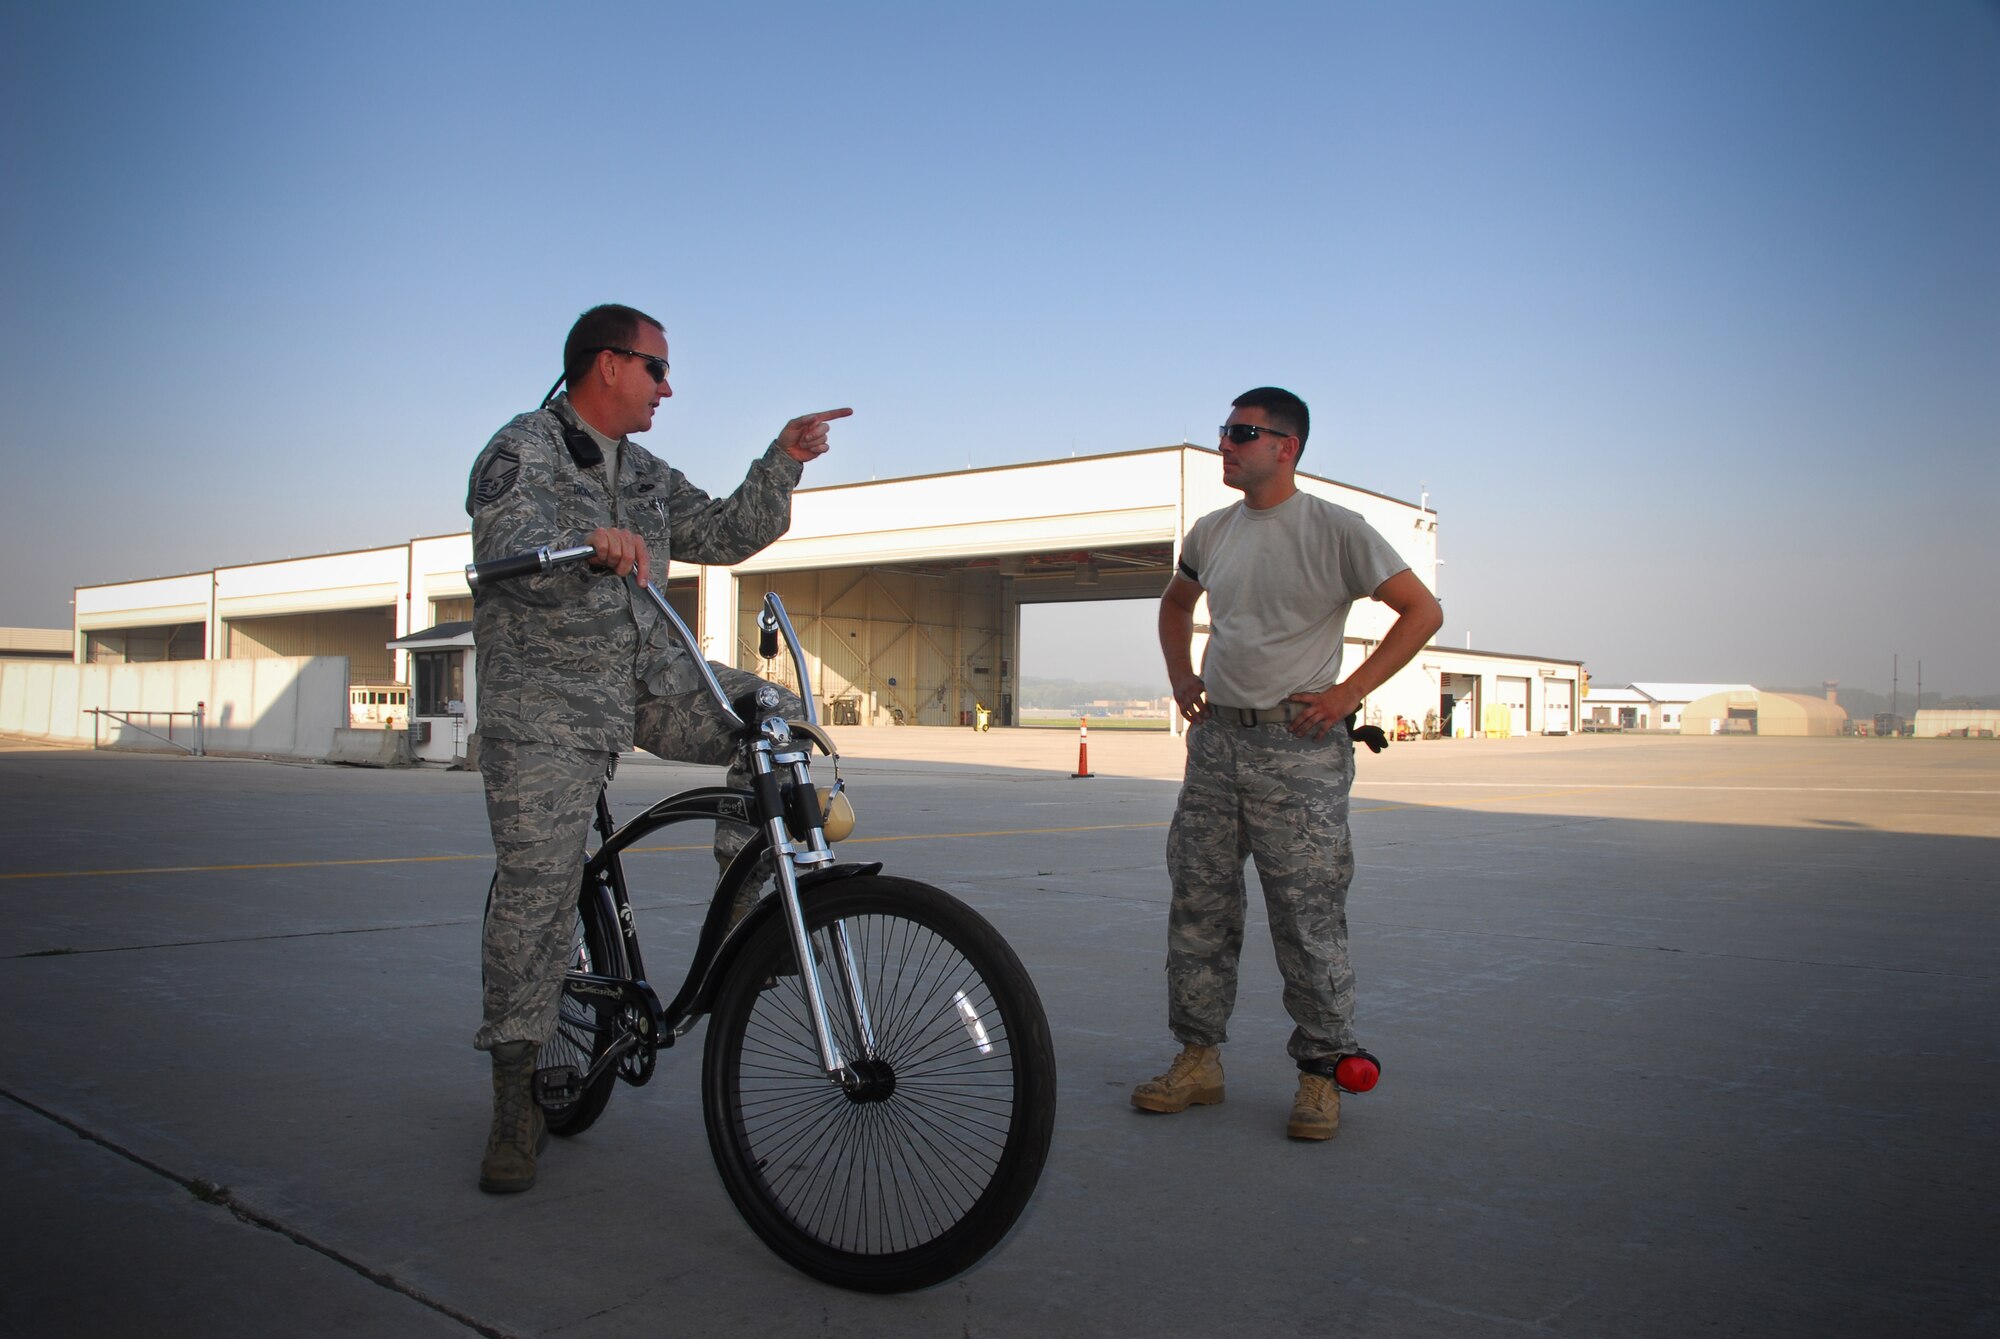 Senior Master Sgt. Al Dickrell and Tech Sgt. David Byzefski, F-16 crew chiefs with the 115th Aircraft Maintenance Squadron, discuss fl ightline operations. Sergeant Dickrell, a crew chief supervisor, sits atop a custom bike he personally bought to communicate with crew chiefs working the flightline here.